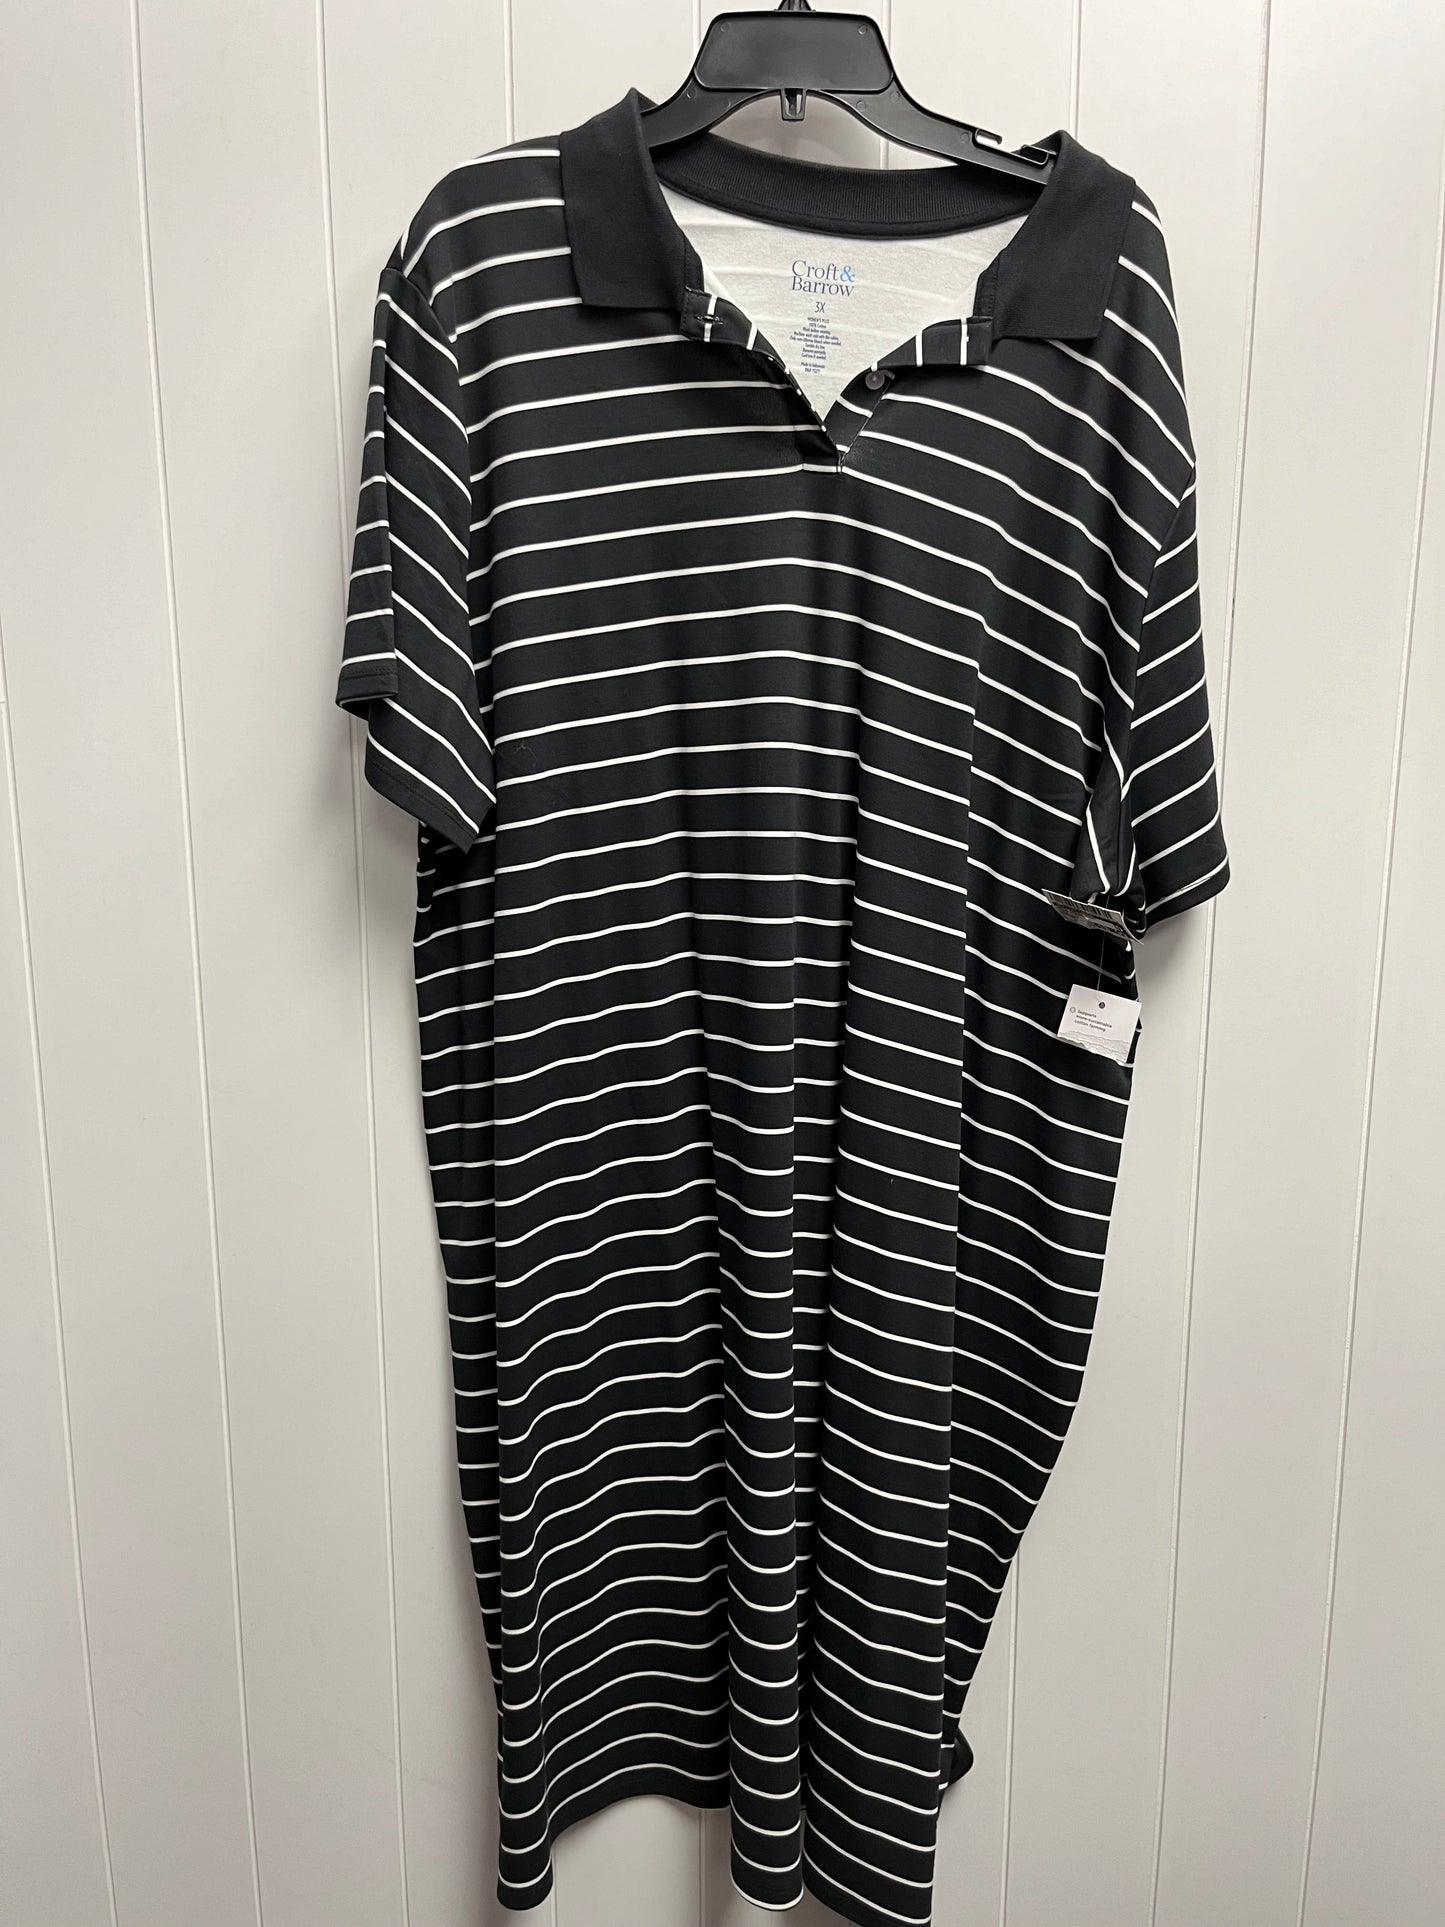 Black & White Dress Casual Short Croft And Barrow, Size 3x